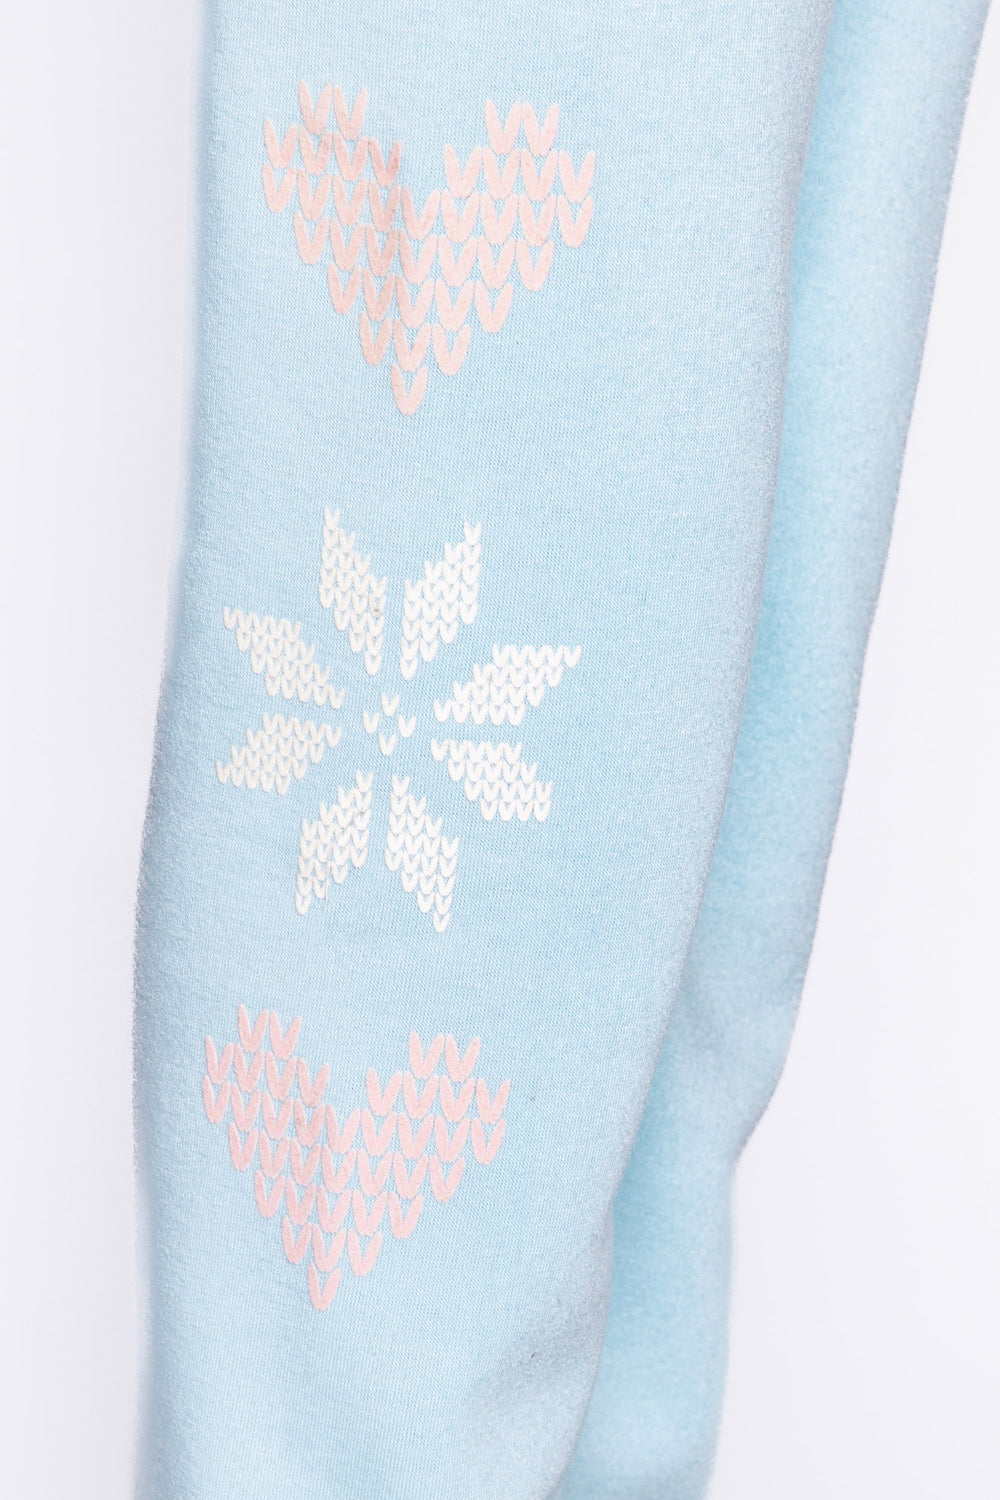 Light blue fleece jogger pant with flocked snowflake graphic print on sides. Comfy side pockets & tie waist. (6982901137508)